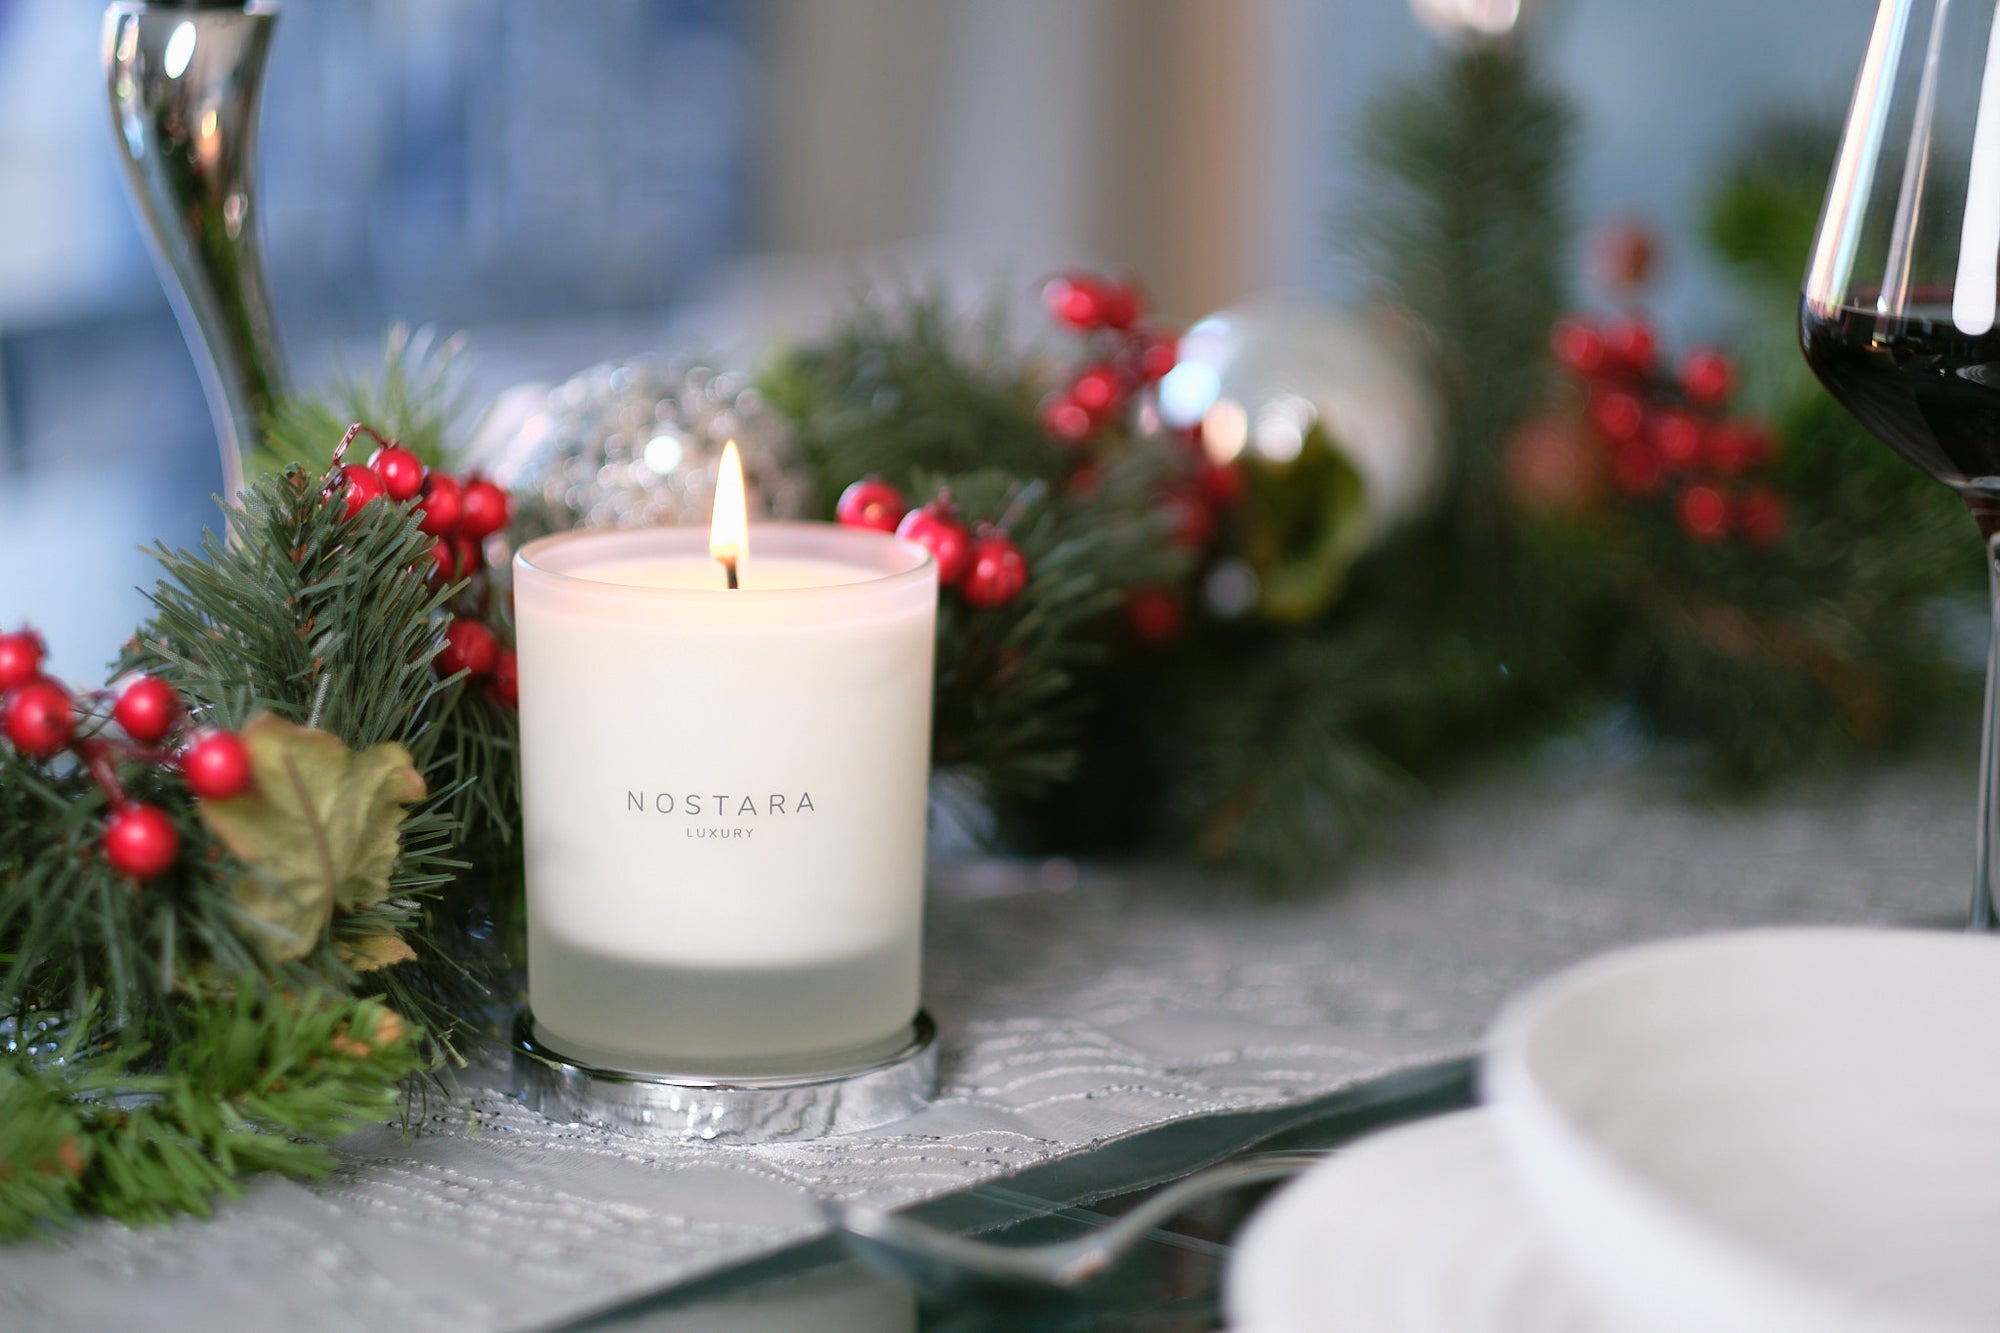 The best winter candles for Christmas